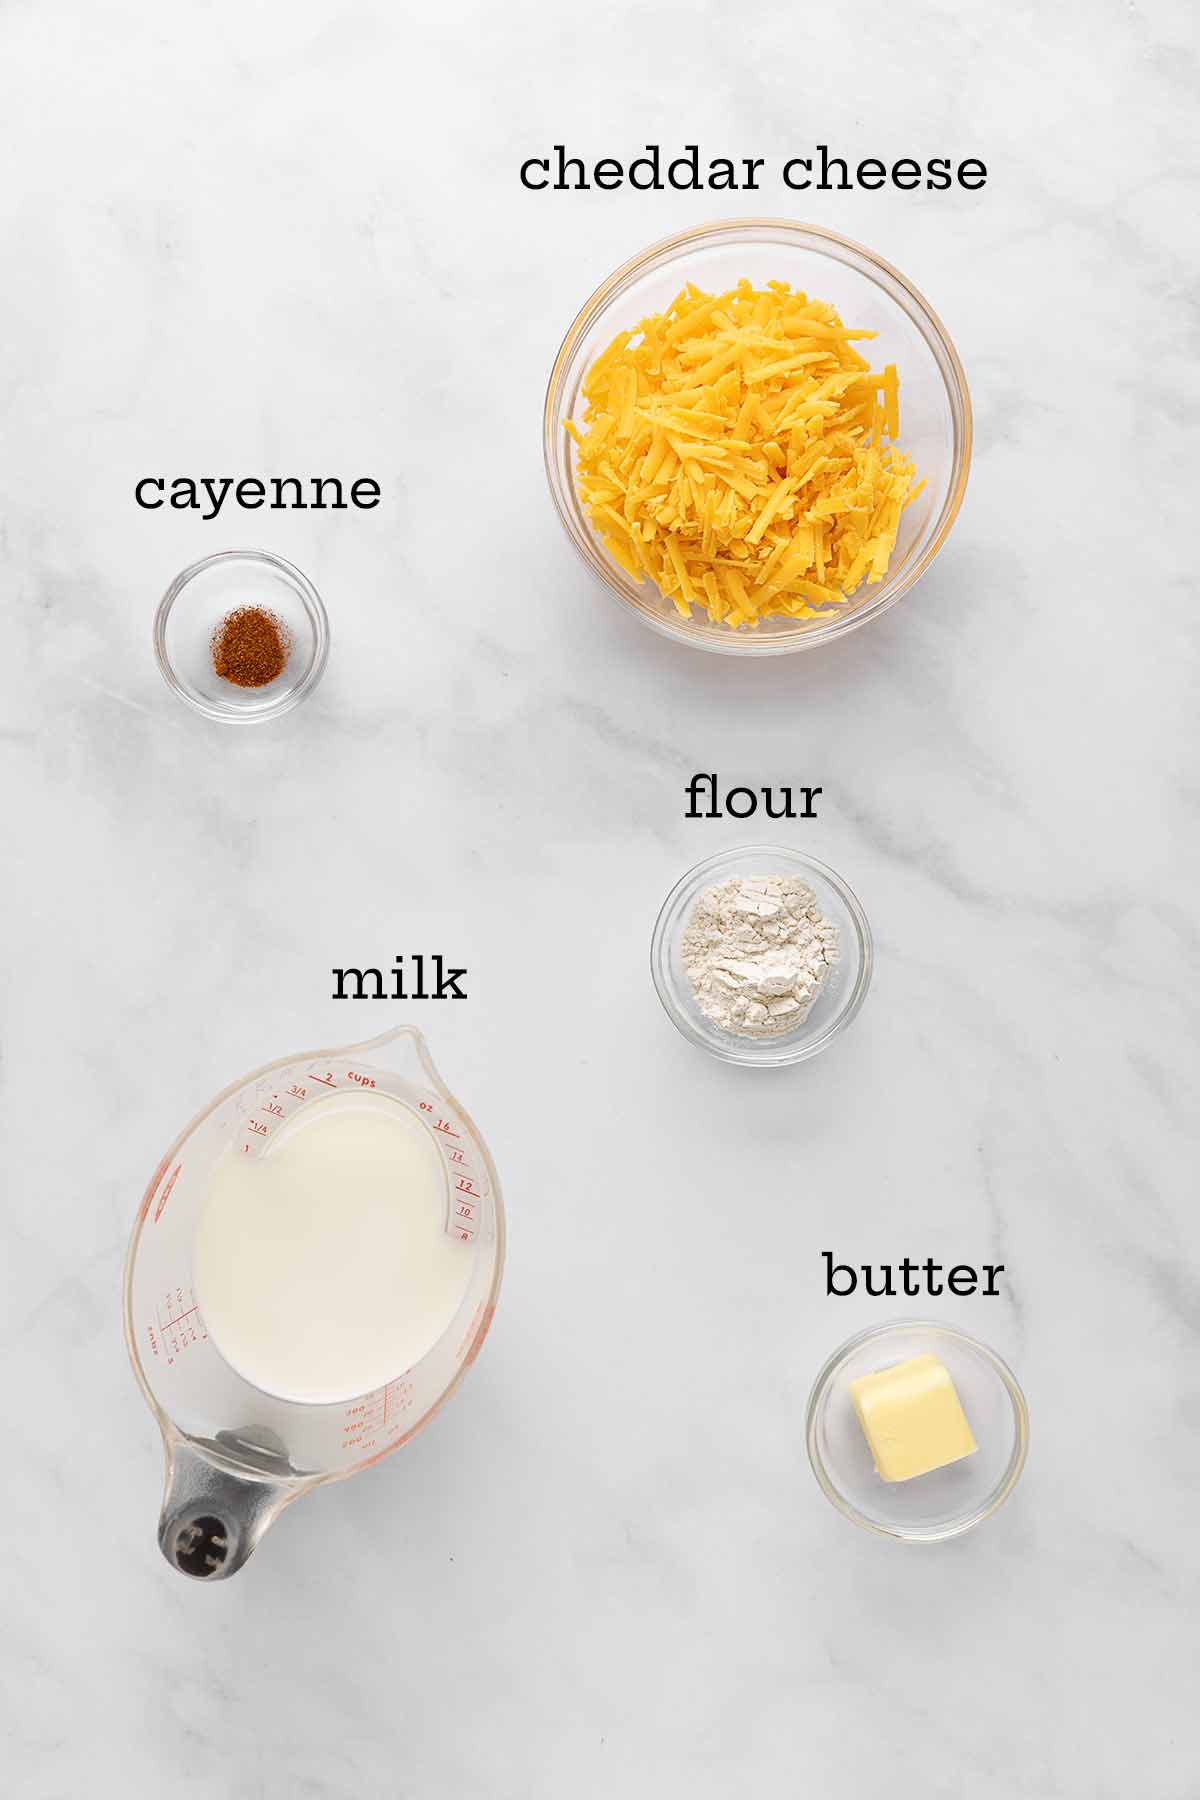 Ingredients for Cheddar cheese sauce--cheese, cayenne, flour, milk, and butter.